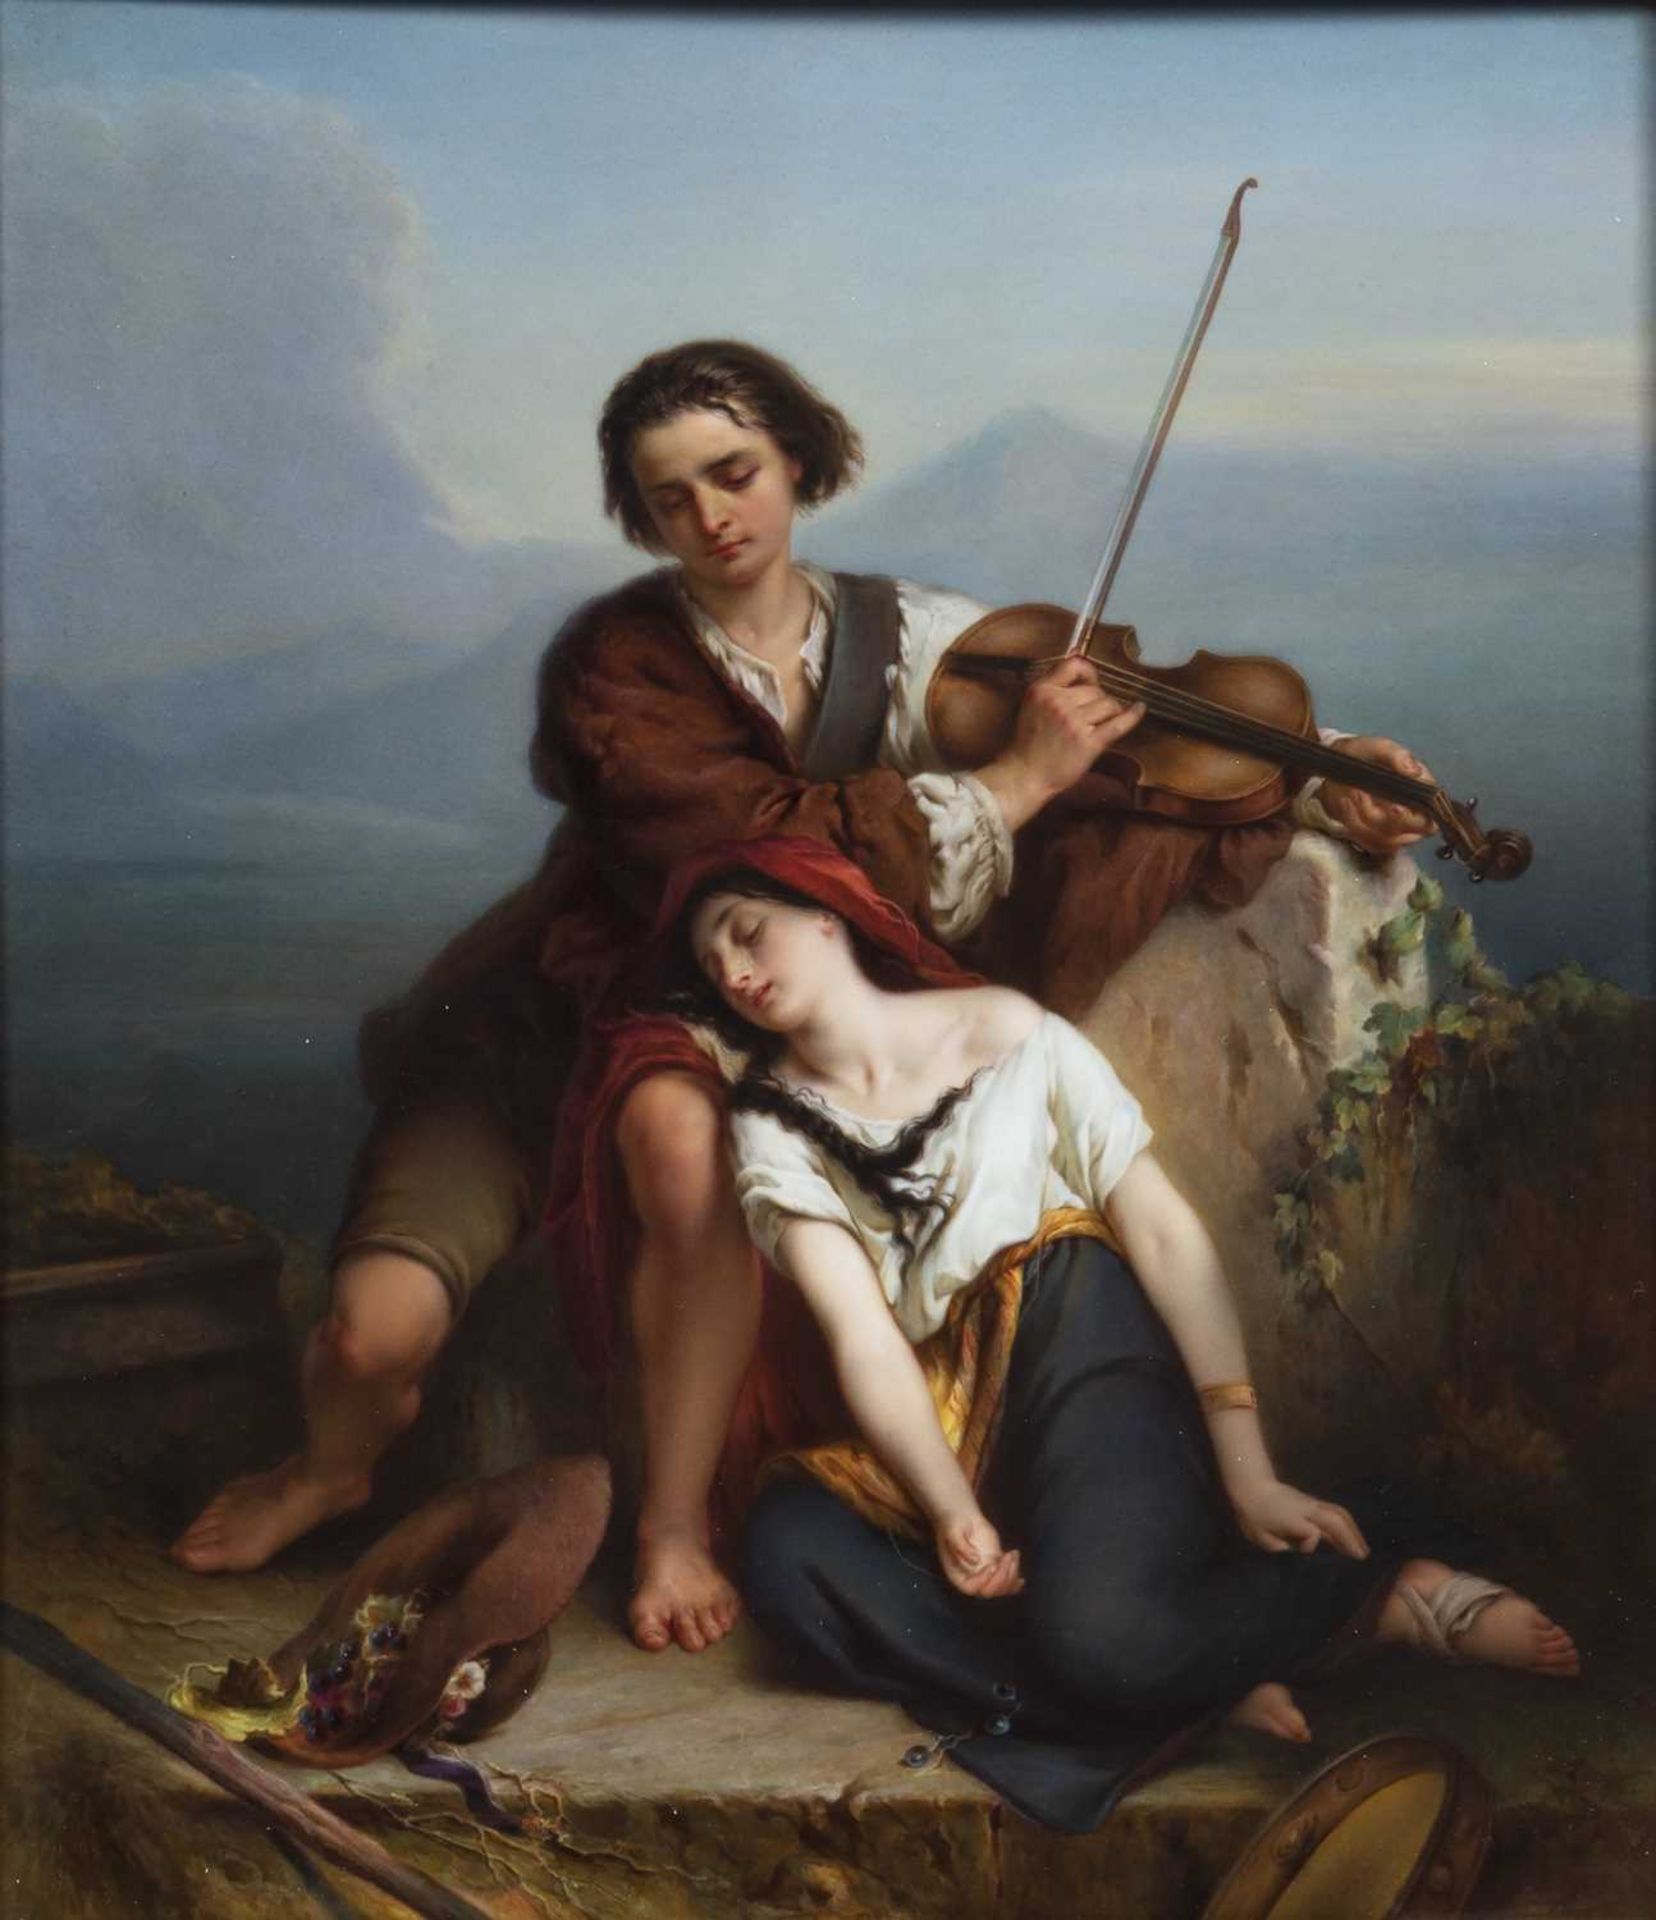 Berlin KPM porcelain plaque 19th Century, 'The Violin Recital' painted with a young man playing a